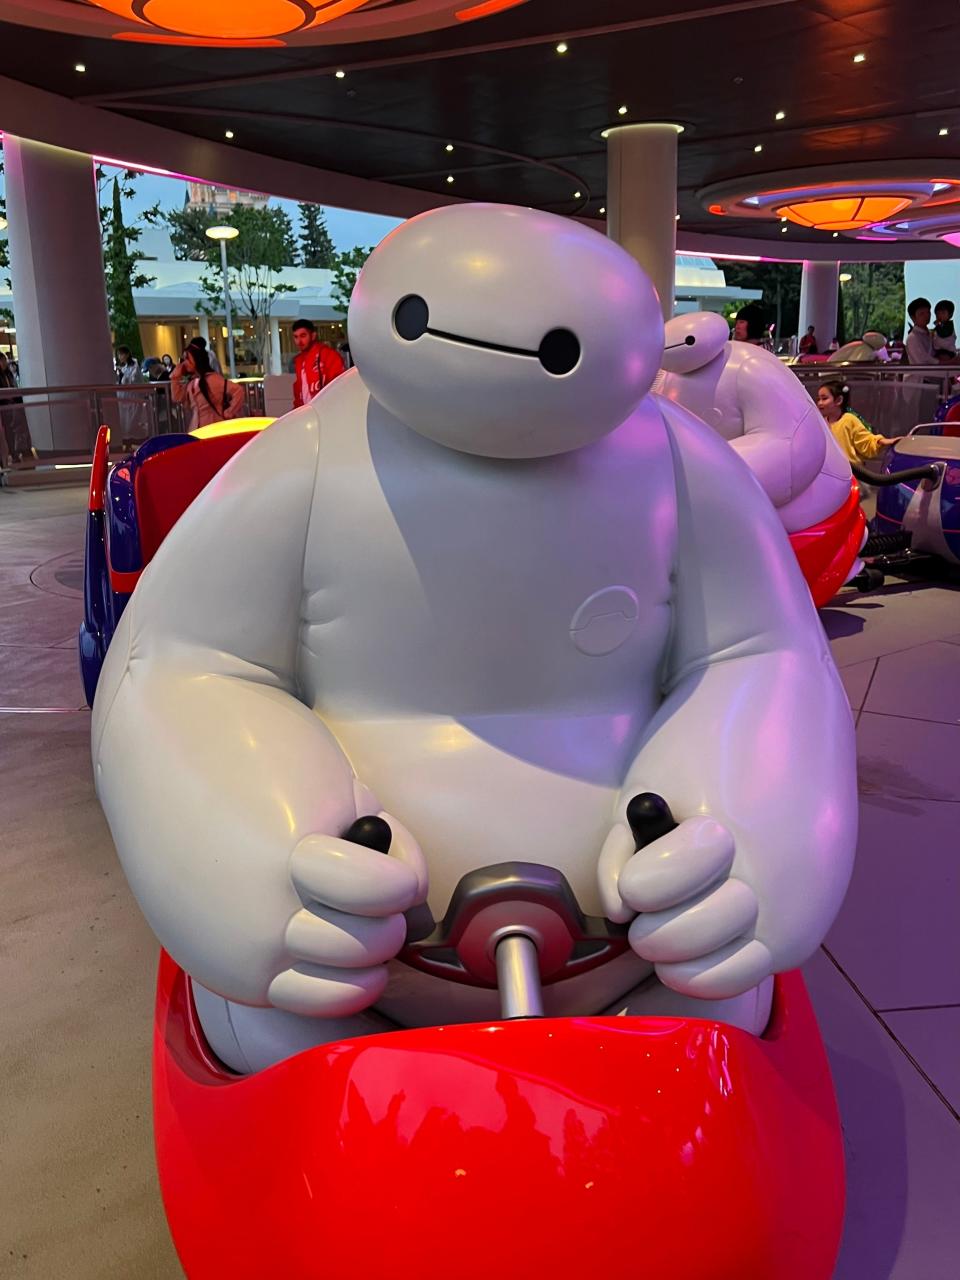 Daniel Jue with Walt Disney Imagineering said the cuddly version of Baymax was specifically requested for Tokyo Disney Resort.